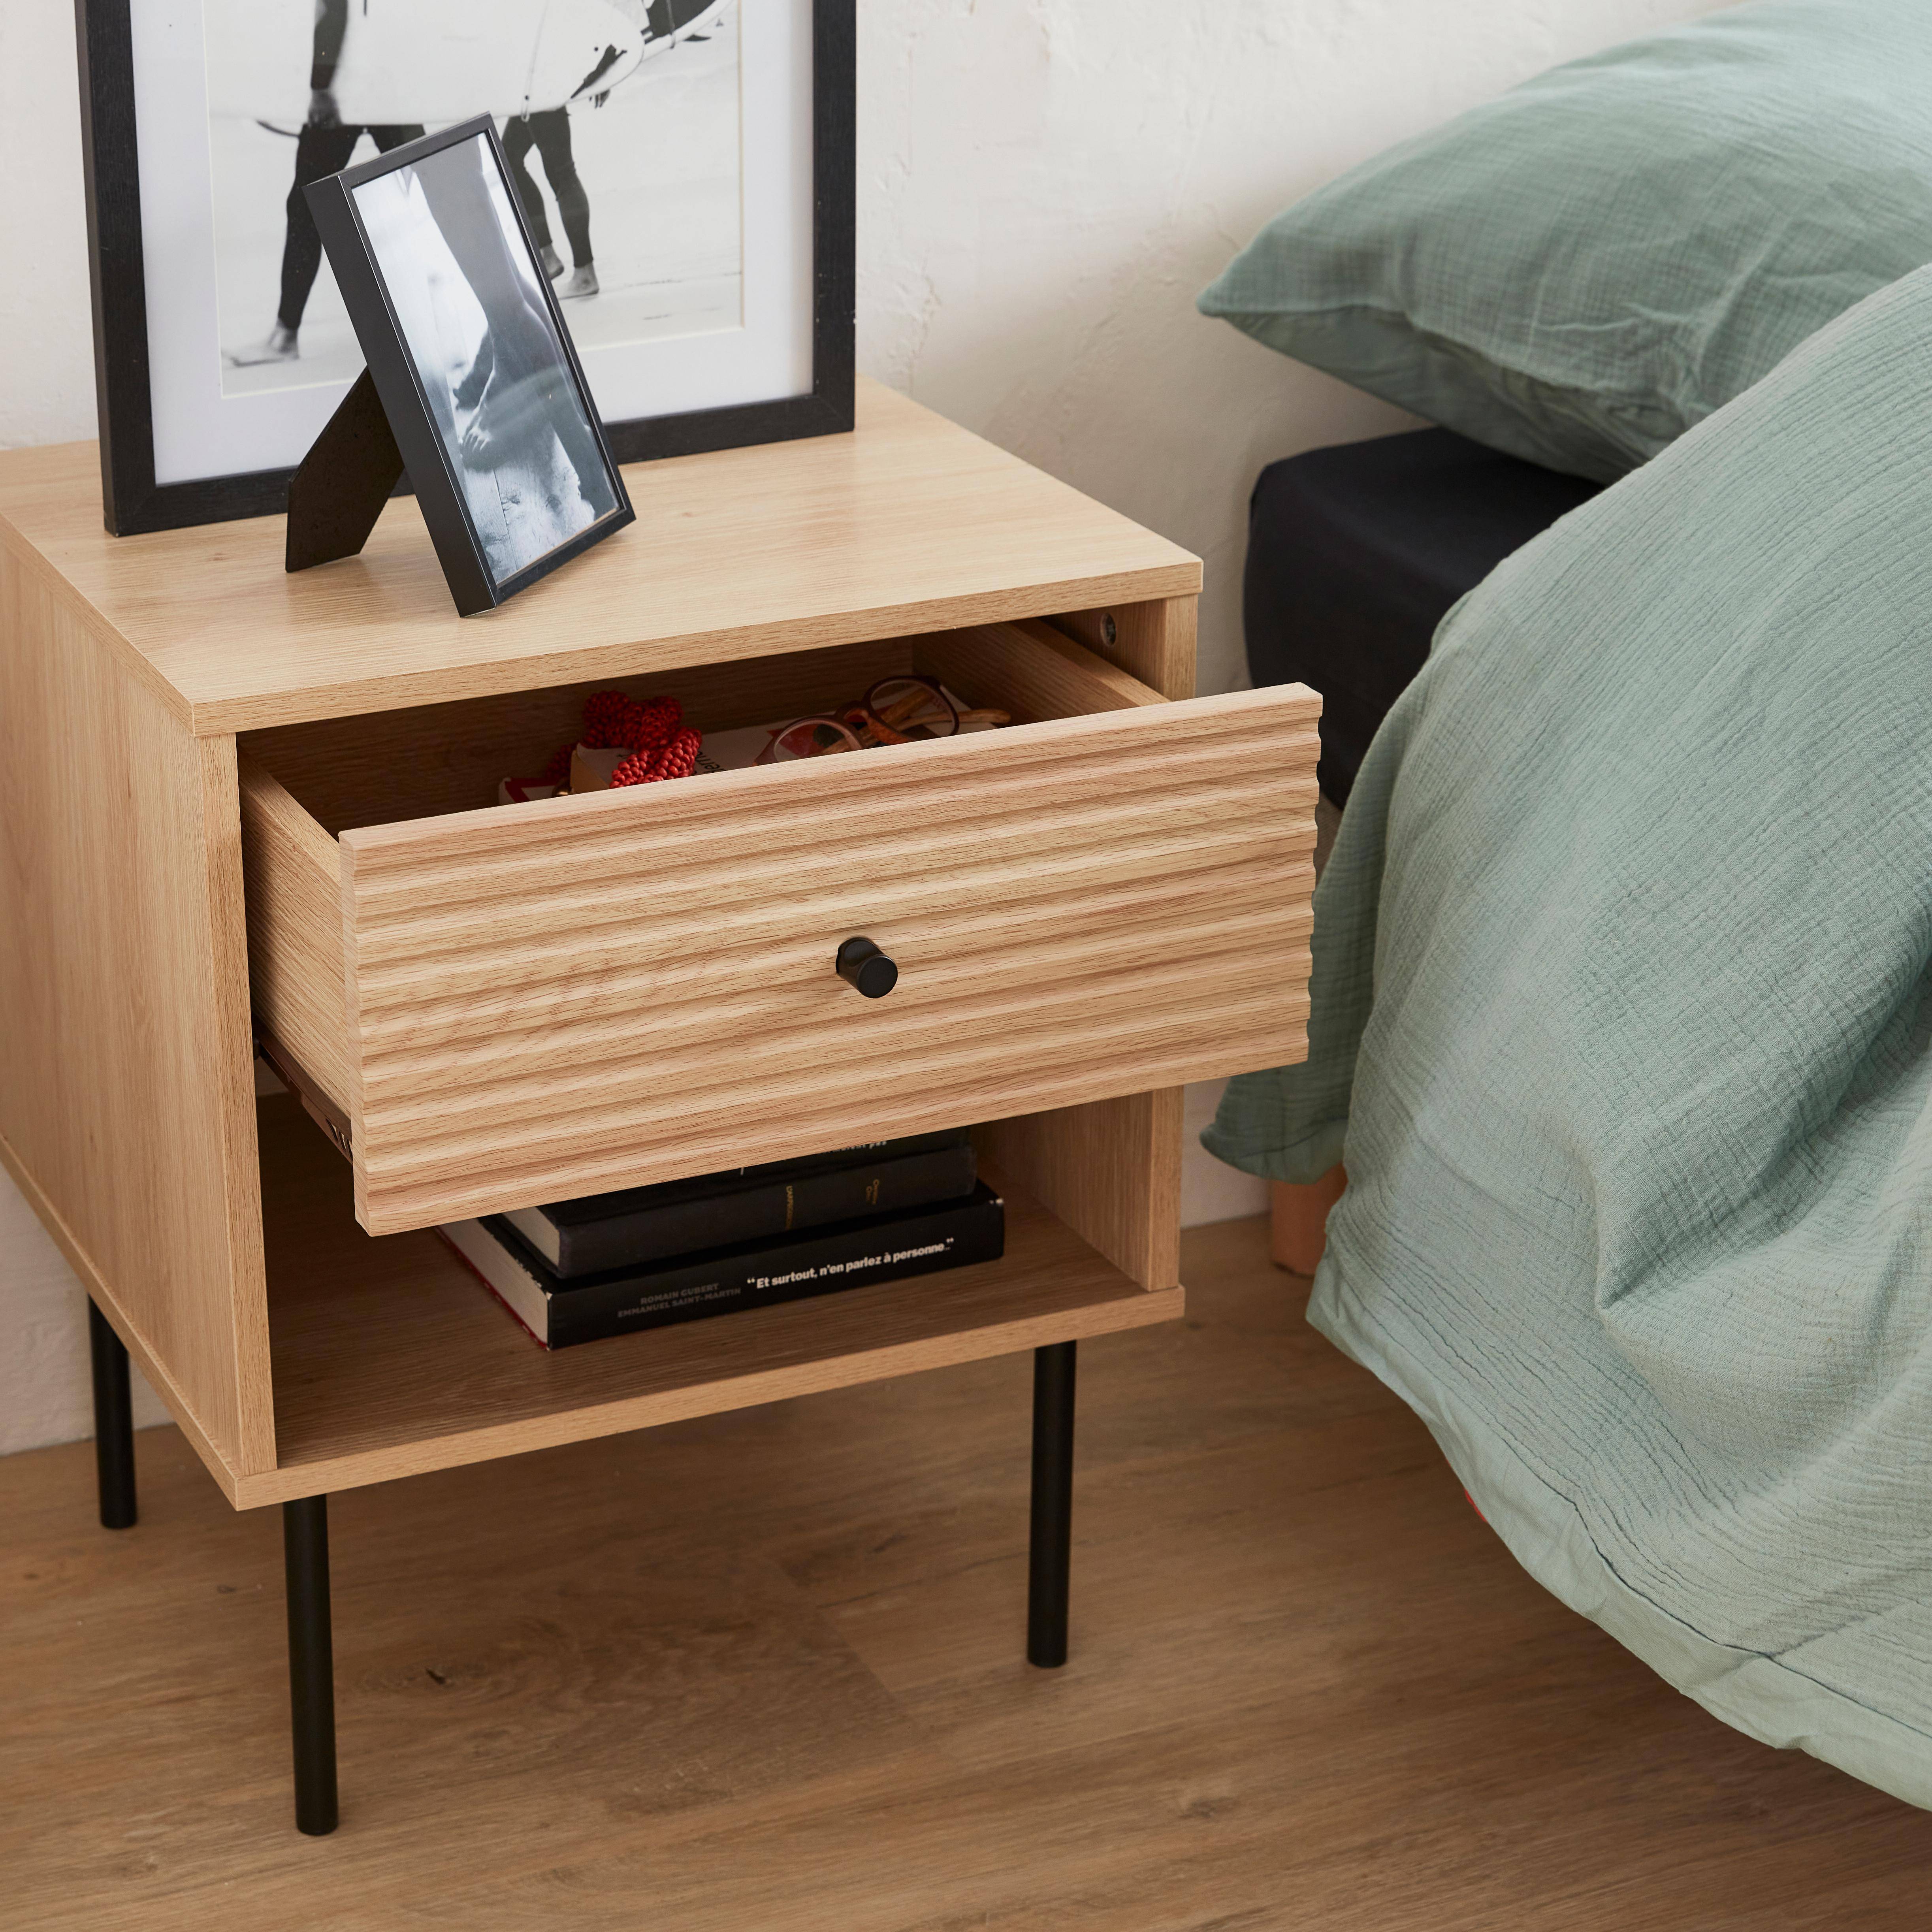 Grooved wood-effect bedside table, 45x39.5x55cm - Braga - Natural wood colour Photo2